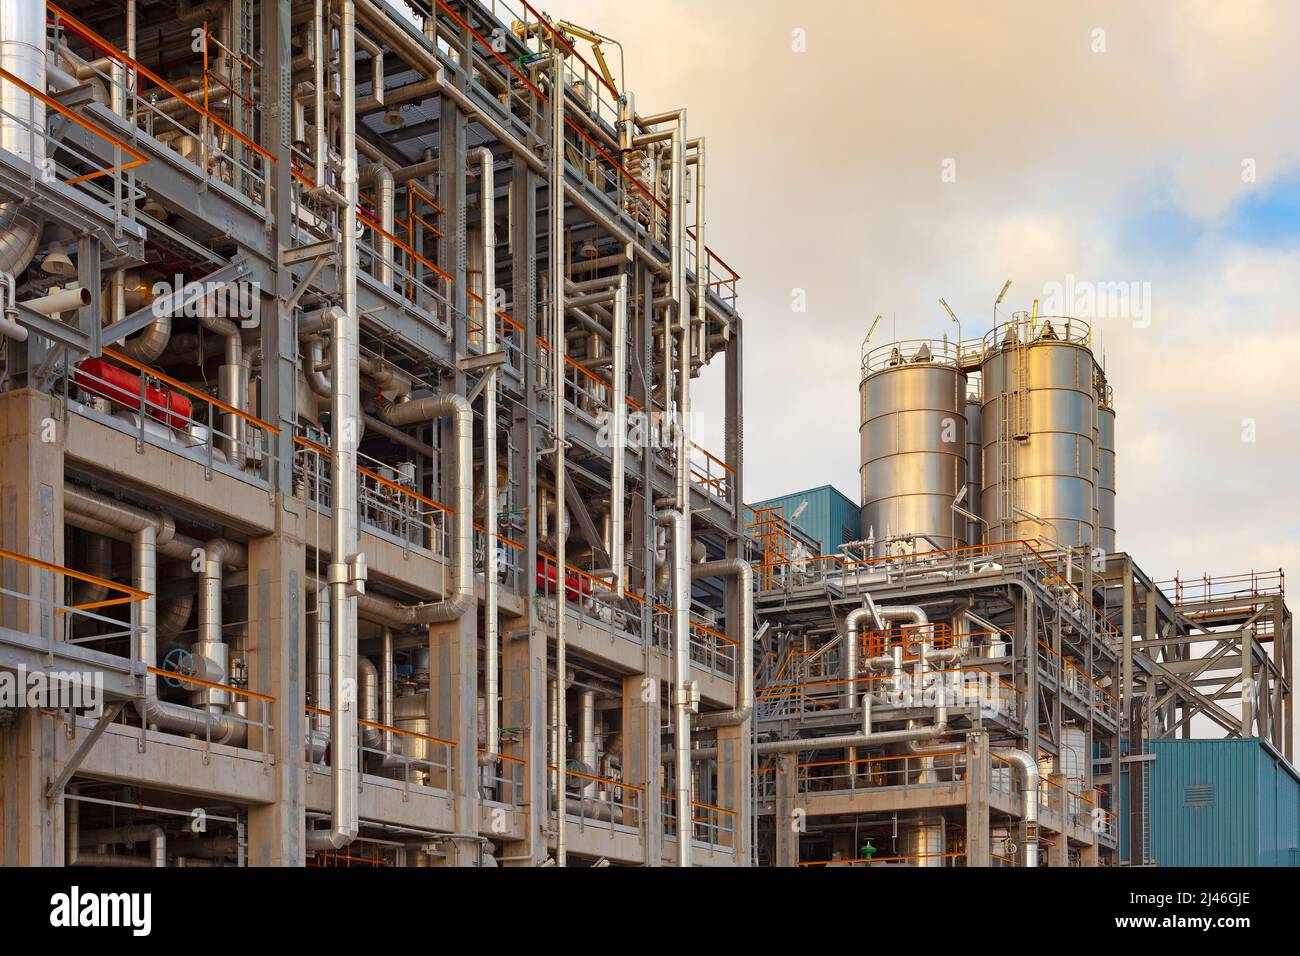 Close-up detail of pipelines and tubes in a gas refinery plant Stock Photo